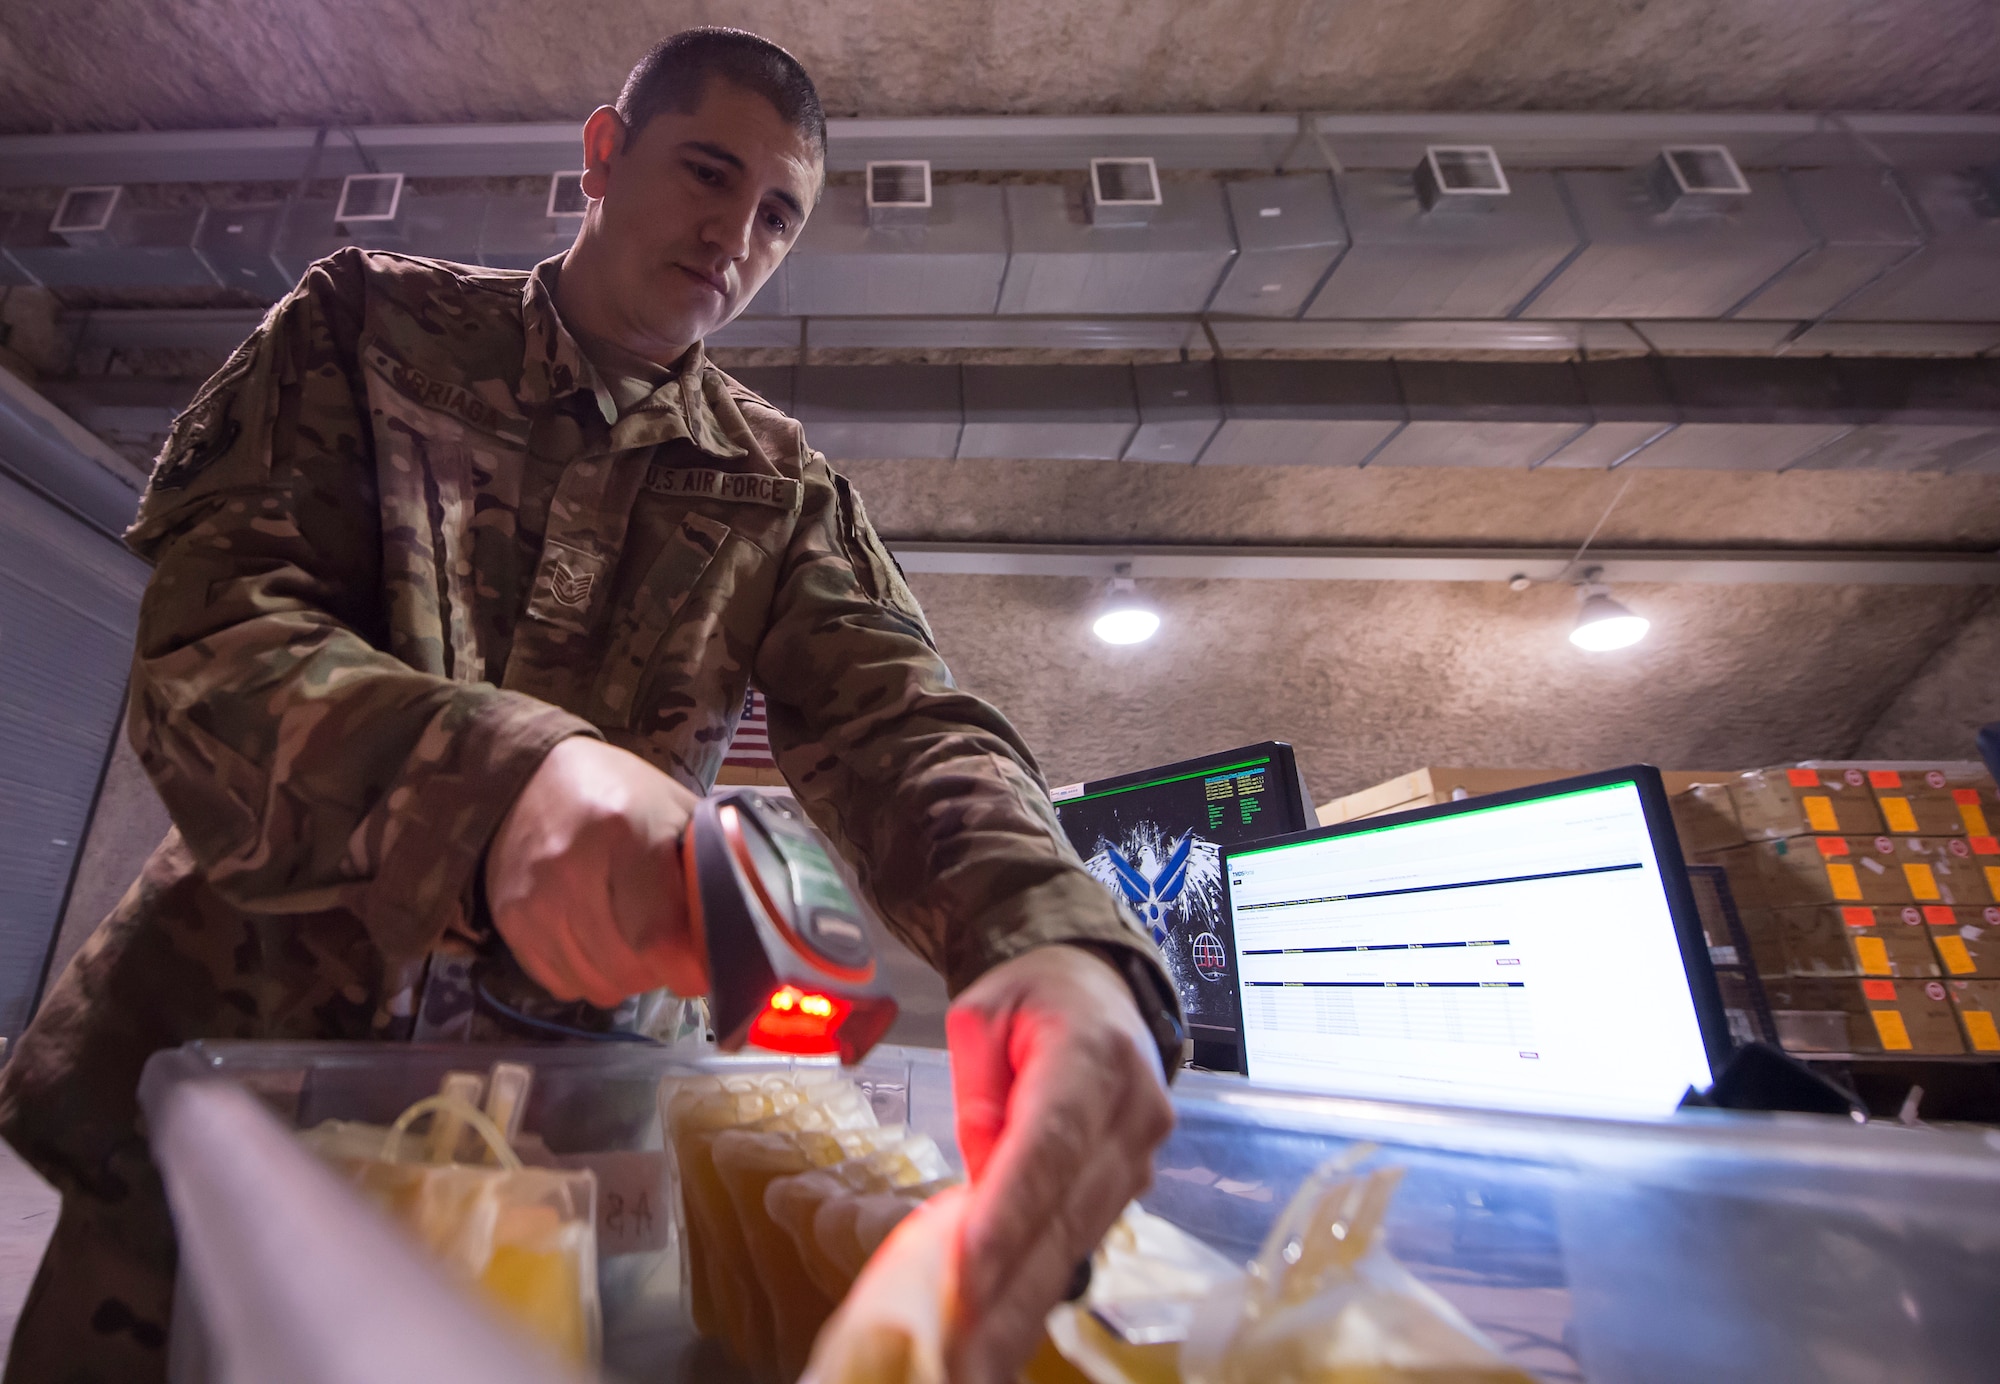 Tech. Sgt. Federico Arriaga, 379th Expeditionary Medical Group Blood Transshipment Center (BTC) logistics craftsman, scans barcodes on blood containers in the BTC Jan. 9, 2019, at Al Udeid Air Base, Qatar. The BTC is comprised of a four-person team that orchestrates the flow of blood and platelet products to 72 forward operating locations and eight mobile field surgical teams throughout U.S. Central Command’s area of responsibility. (U.S. Air Force by Tech. Sgt. Christopher Hubenthal)